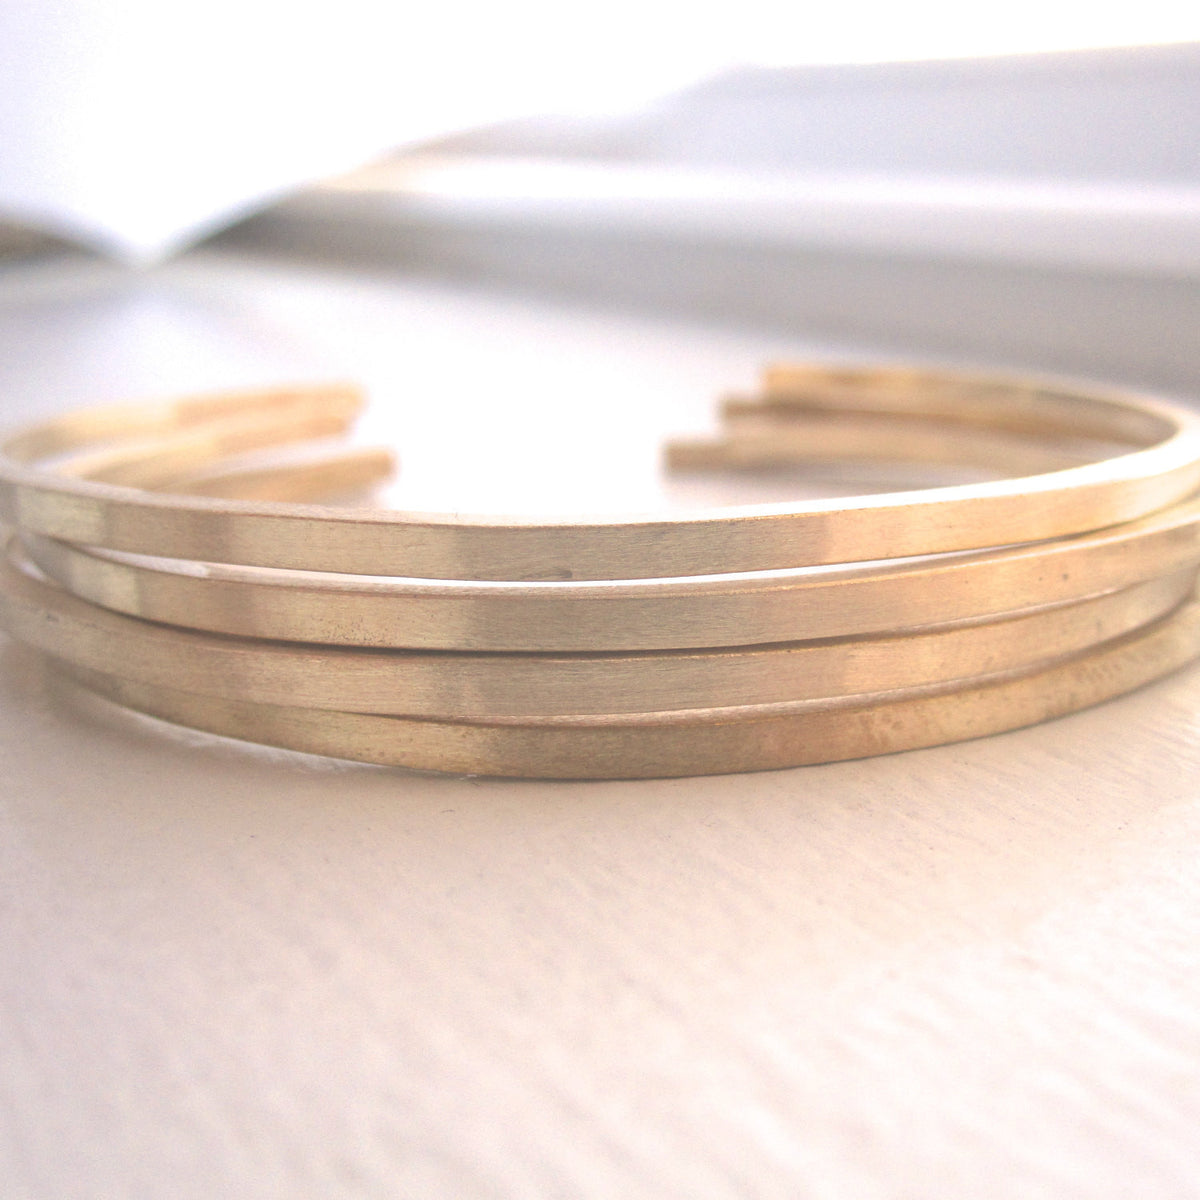 Set of 4 Brass Hand-Made Adjustable Square Cuff Bangle Bracelets With Rounded Ends - 0133 - Virginia Wynne Designs